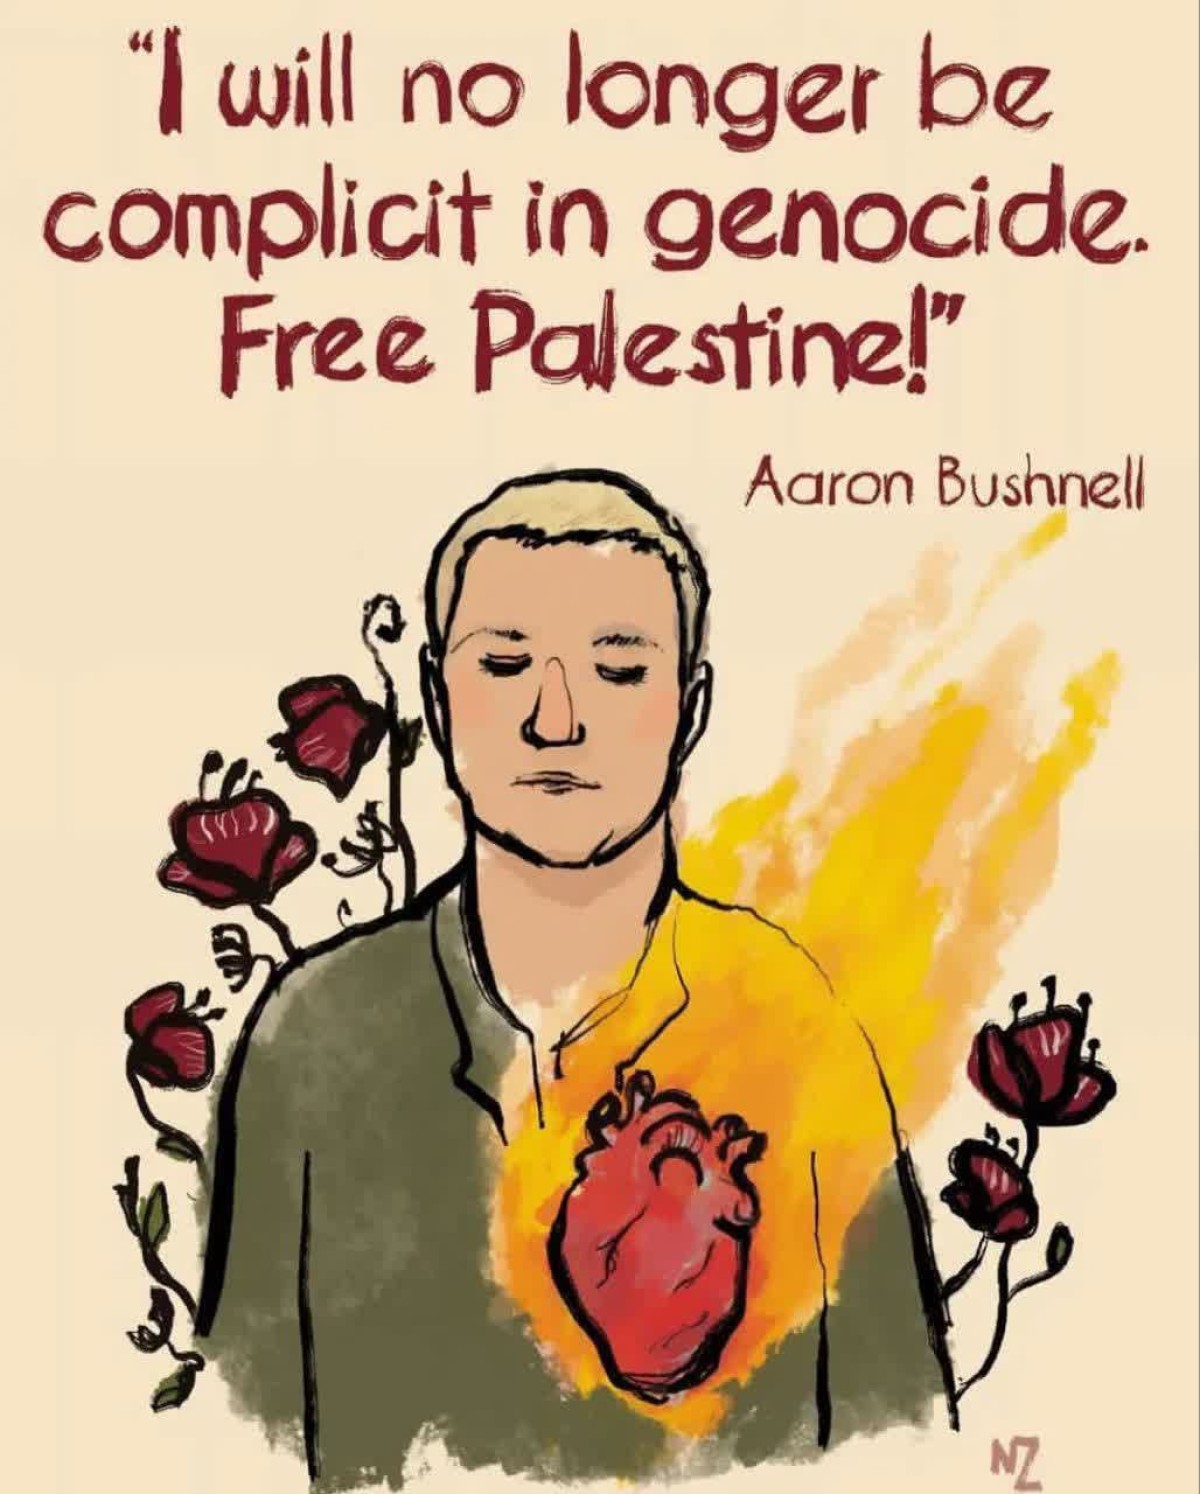 "I will no longer be complicit in genocide. Free Palestine!" Aaron Bushnell